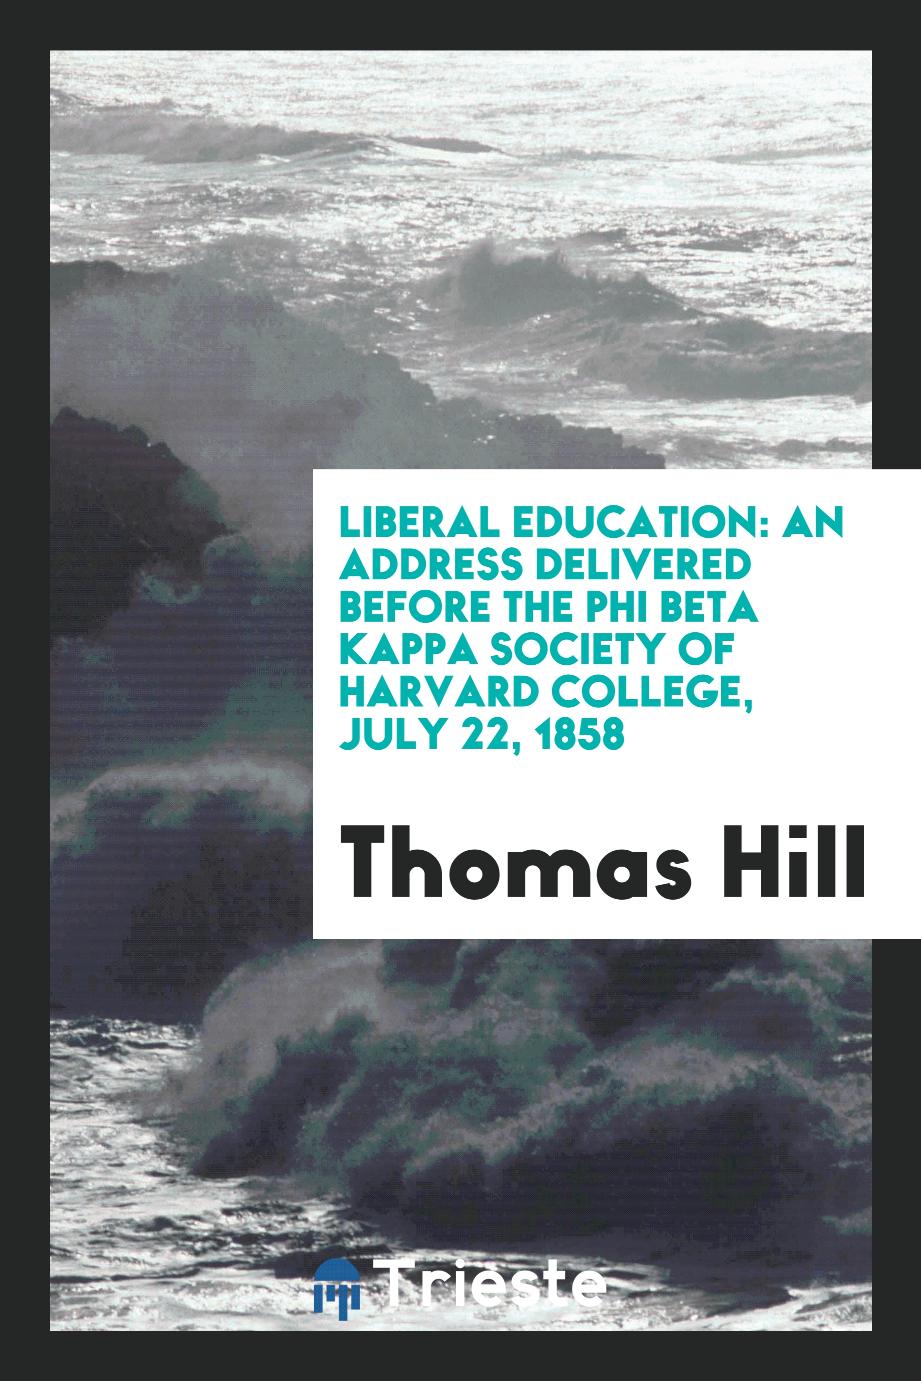 Liberal Education: An Address Delivered Before the Phi Beta Kappa Society of Harvard College, July 22, 1858